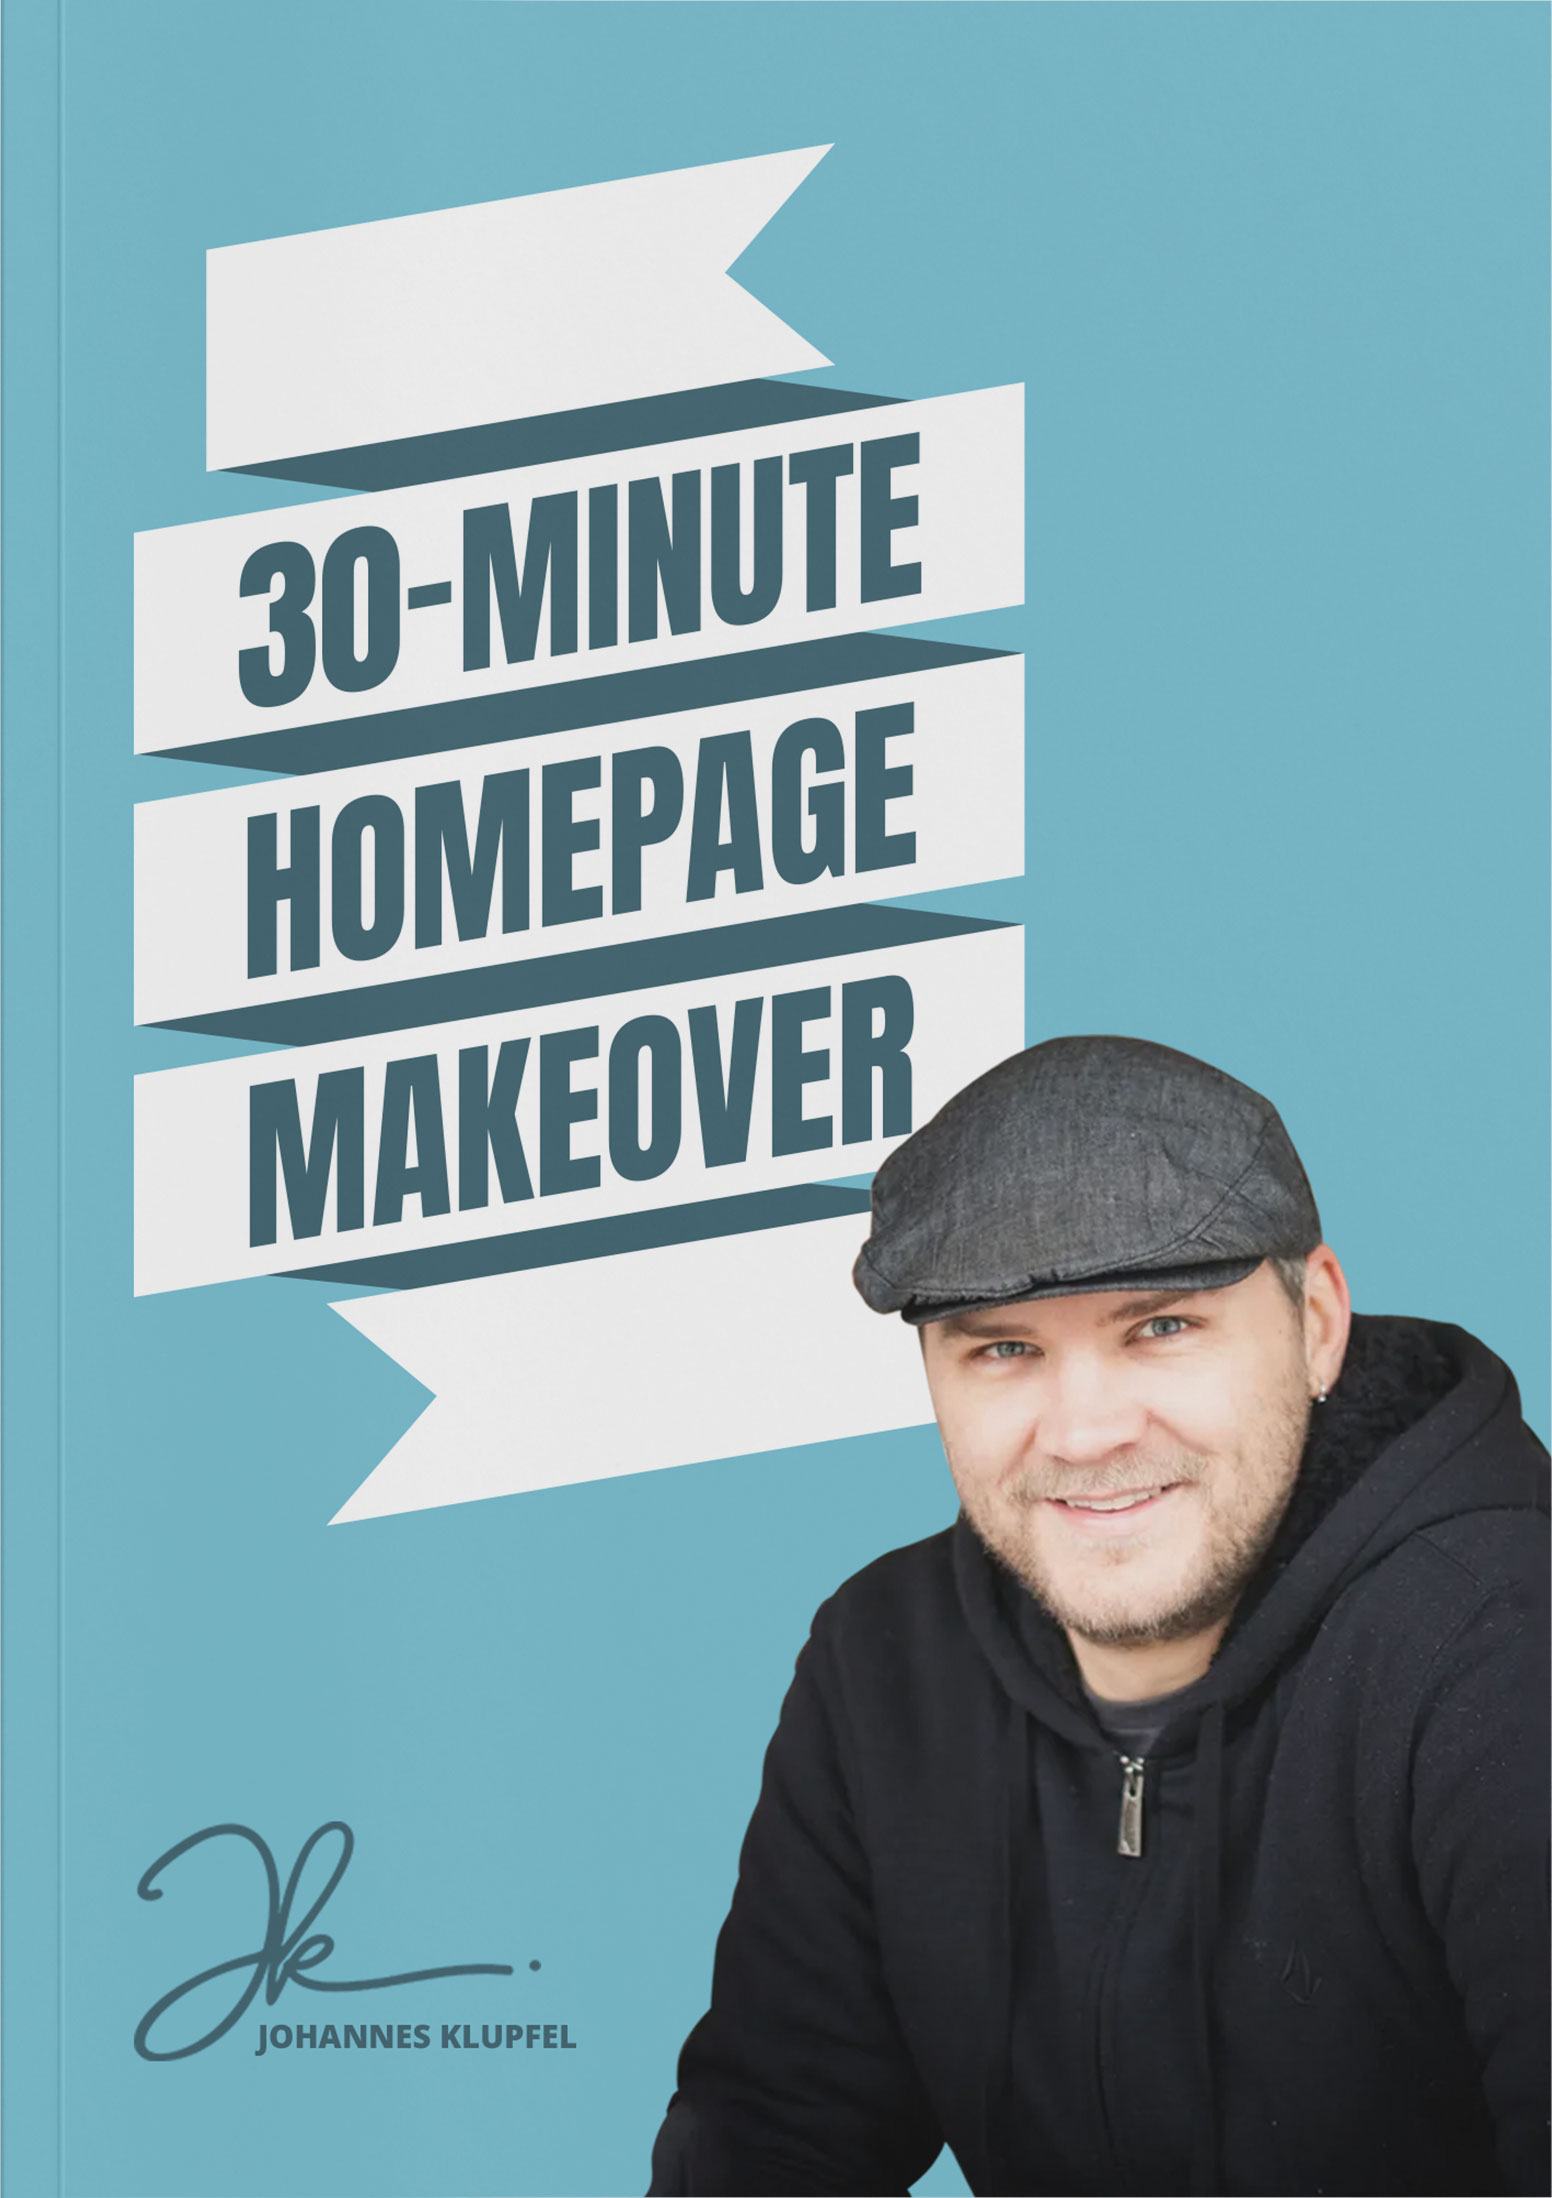 30 Minute Homepage Makeover